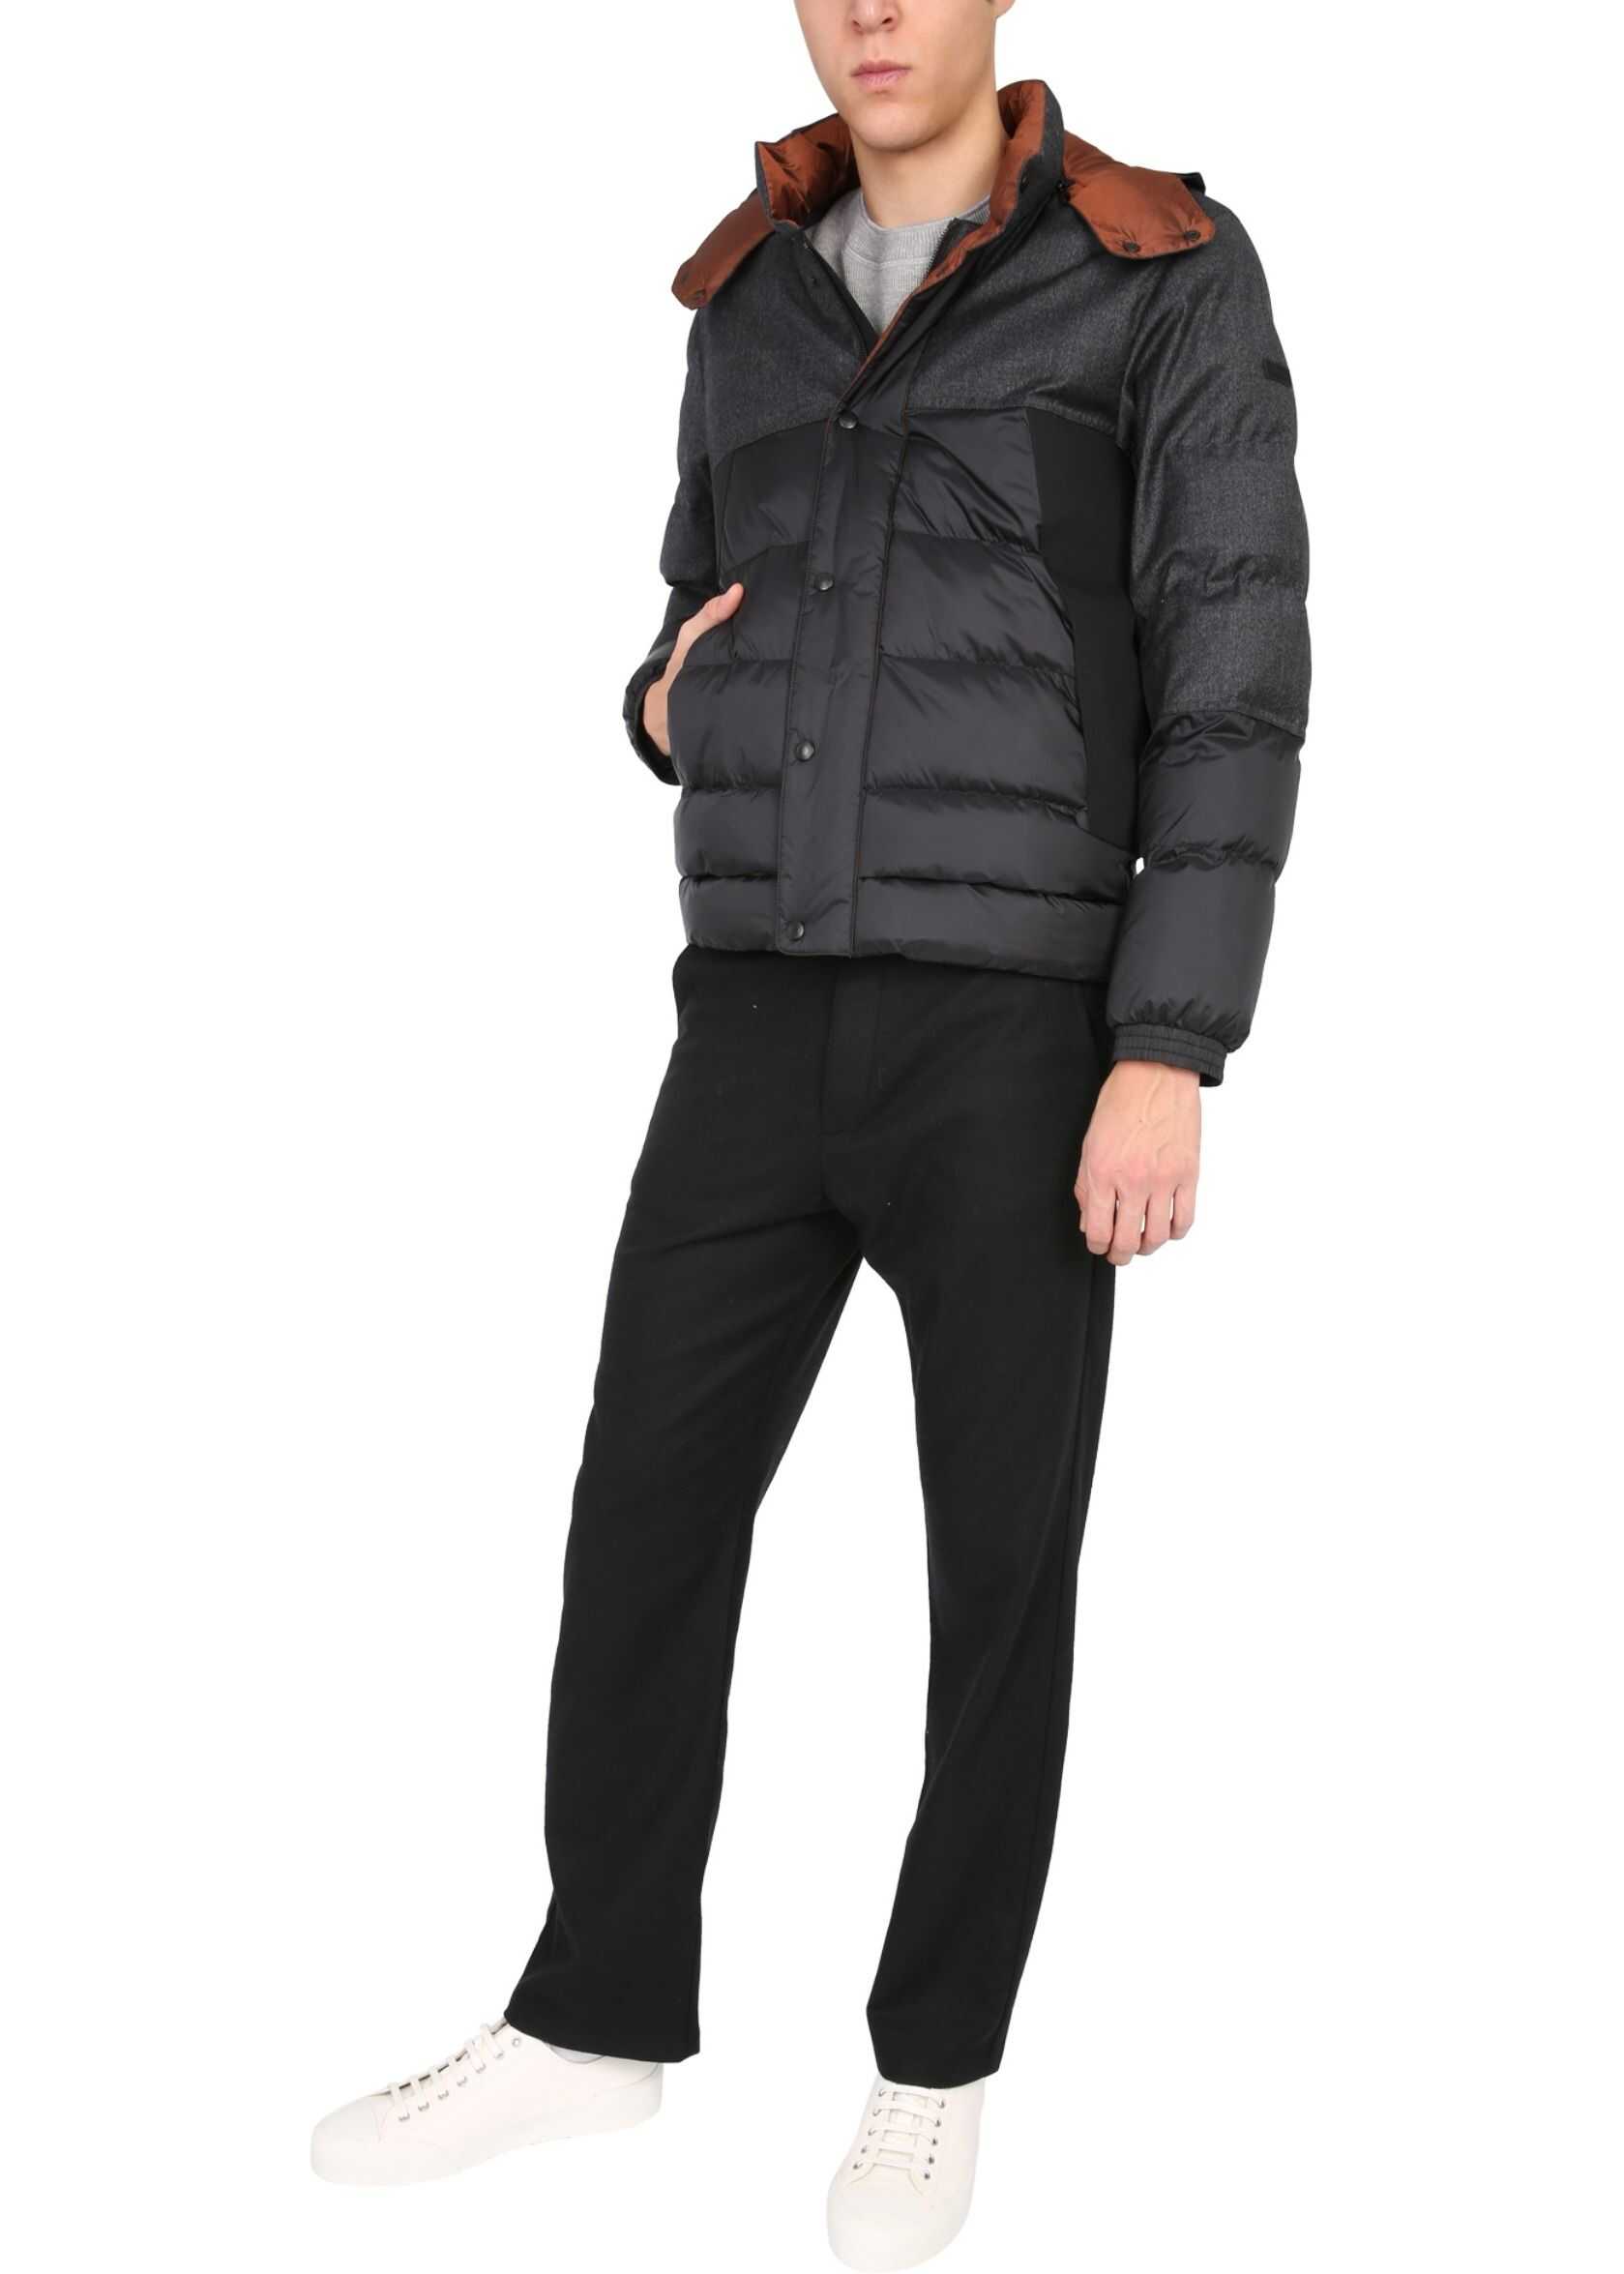 Z Zegna Trimateric High Insultation Project Down Jacket BLACK